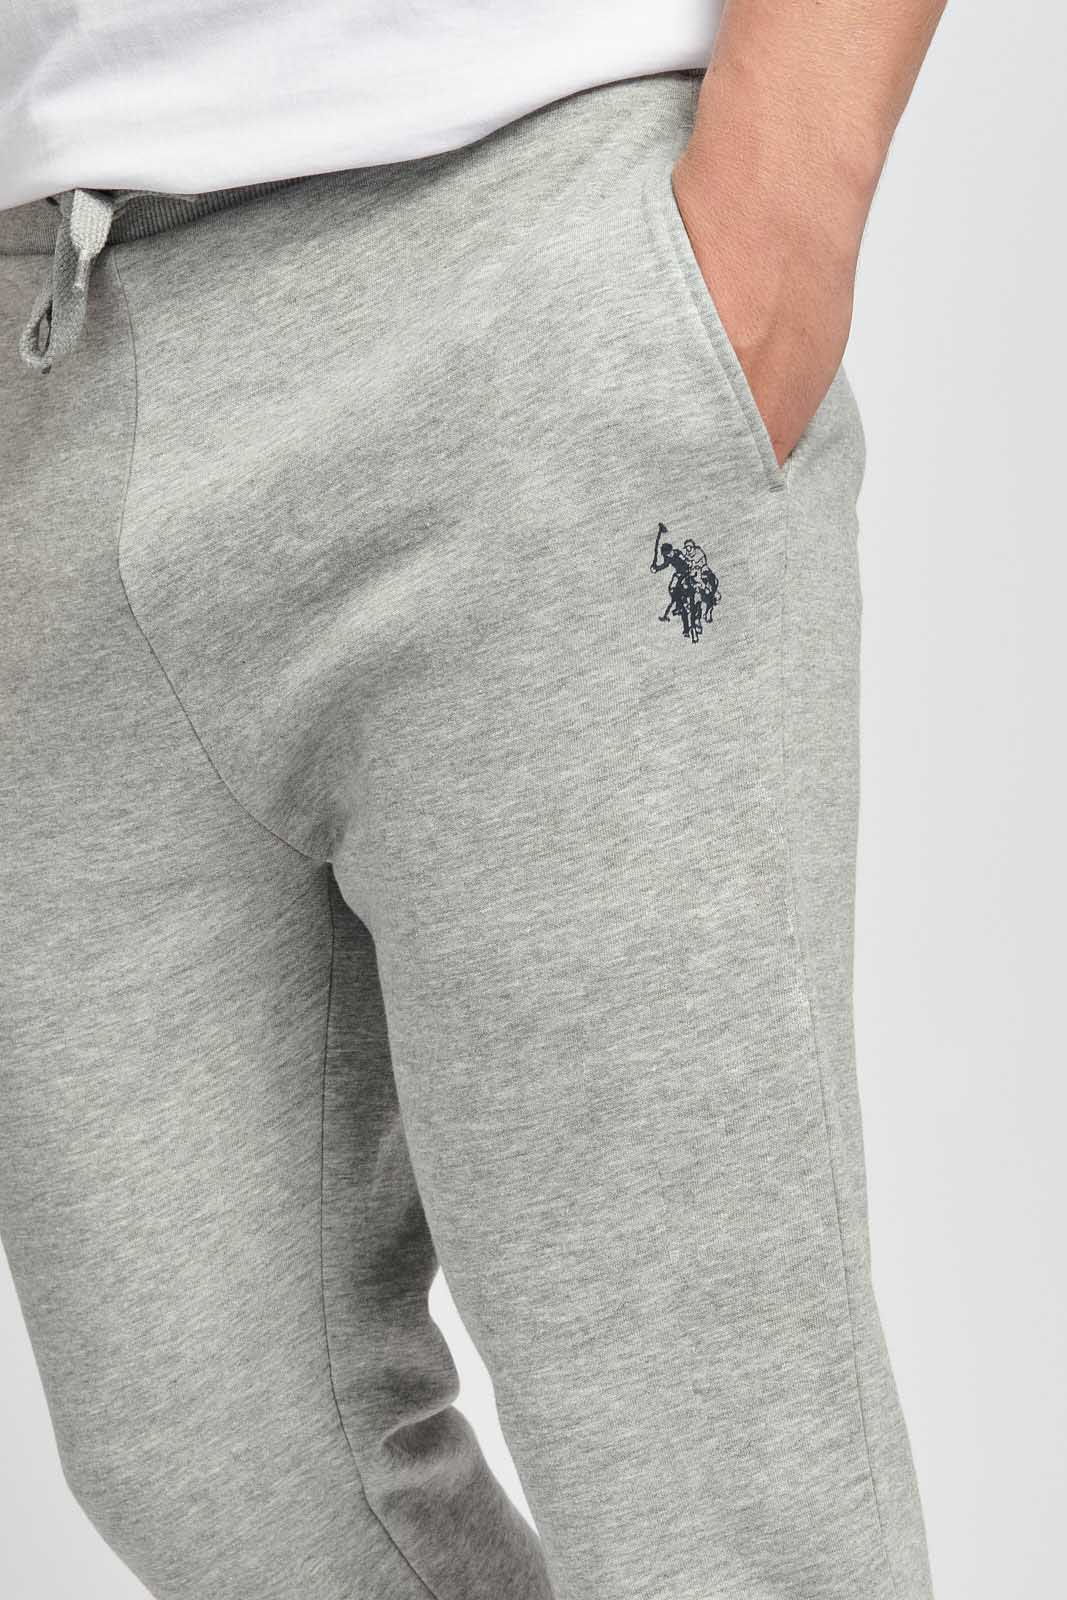 U.S. Polo Assn. Stripe Tape Fleece Joggers, Heather Light Grey, Small :  : Clothing, Shoes & Accessories